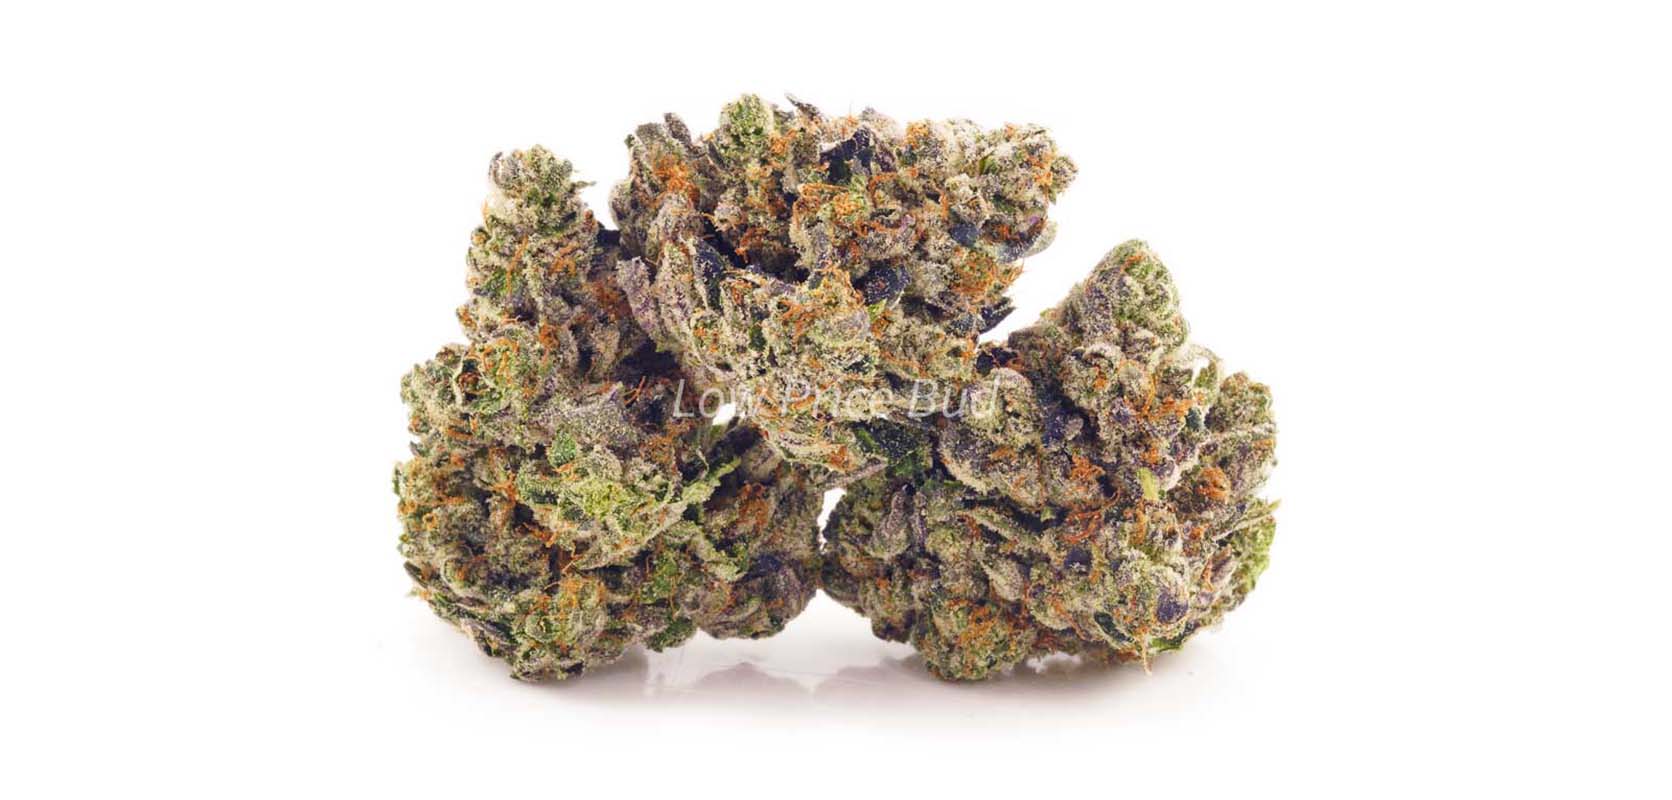 Platinum Bubba weed online Canada. Order weed online mail order marijuana from Low Price Bud weed dispensary.